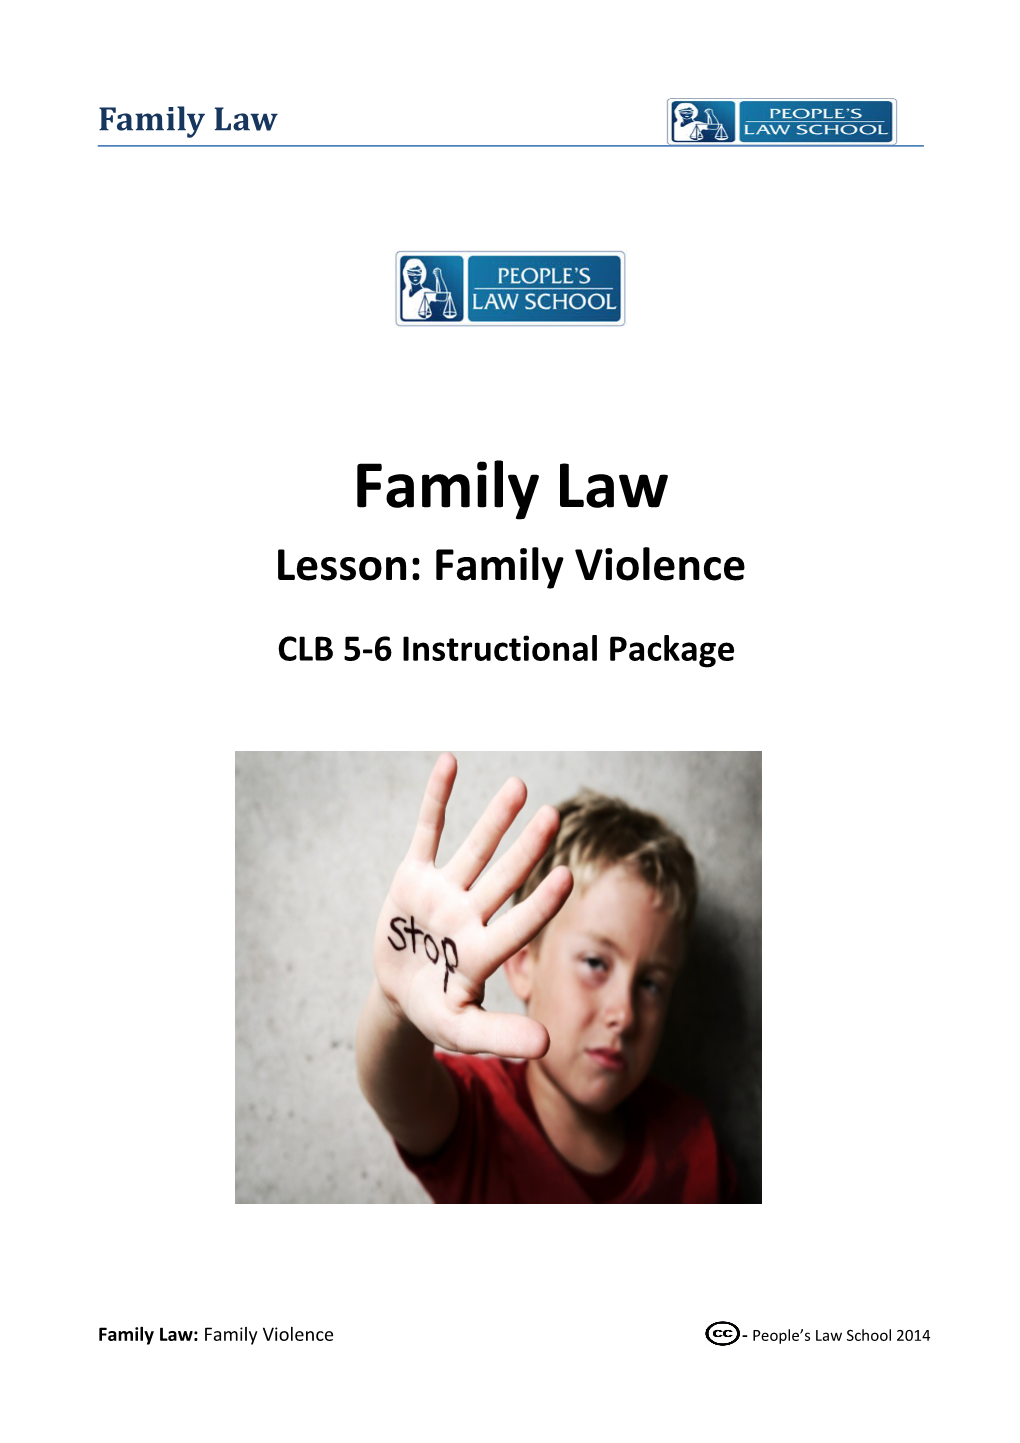 Family Law: Family Violence (CLB 5-6)